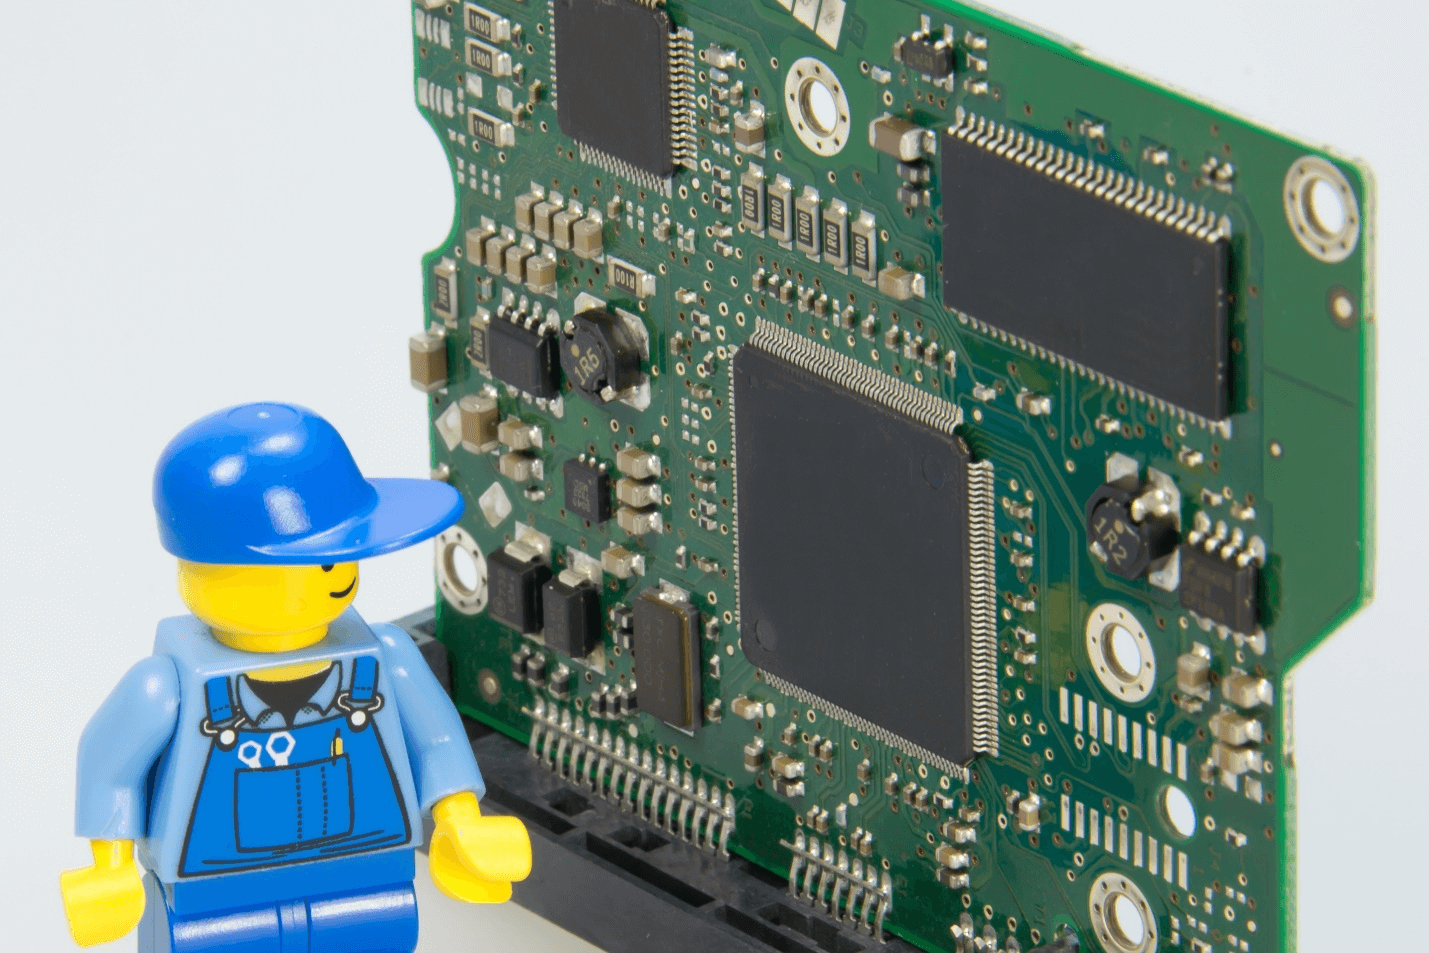 Lego figure with circuit board components.